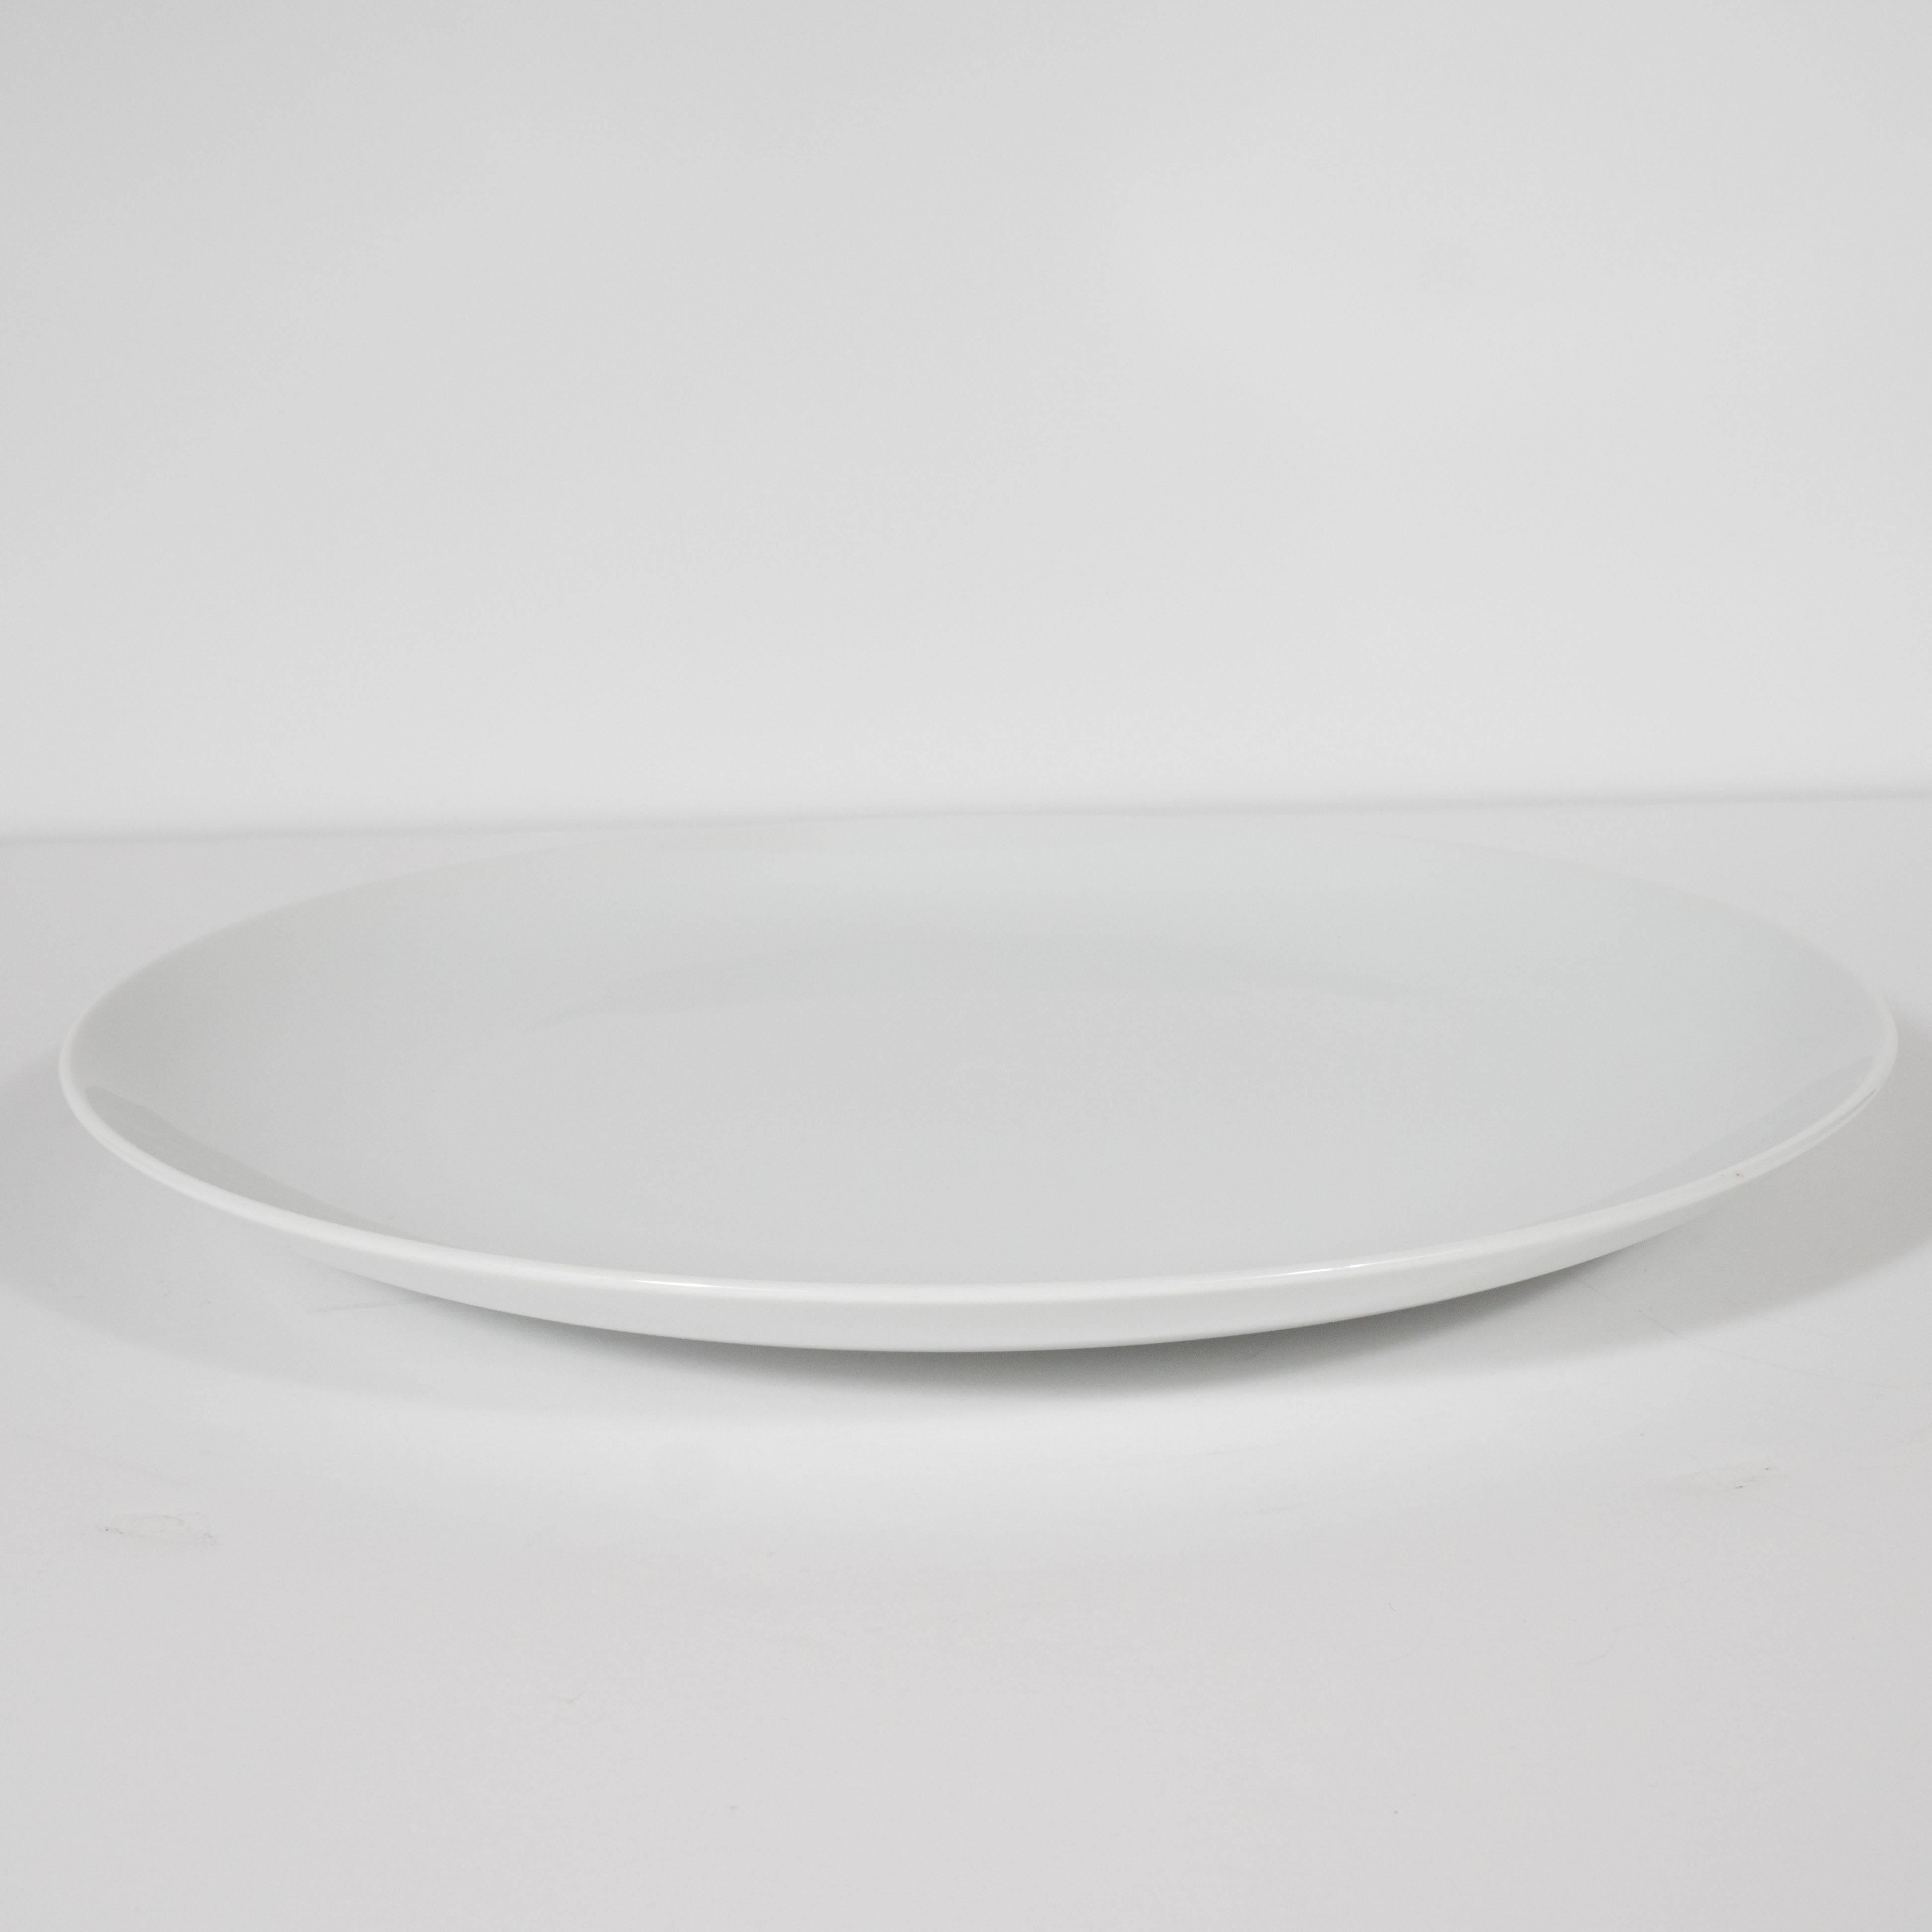 Three Mid-Century Modern White Ceramic Serving Plate by Tiffany & Co. 2